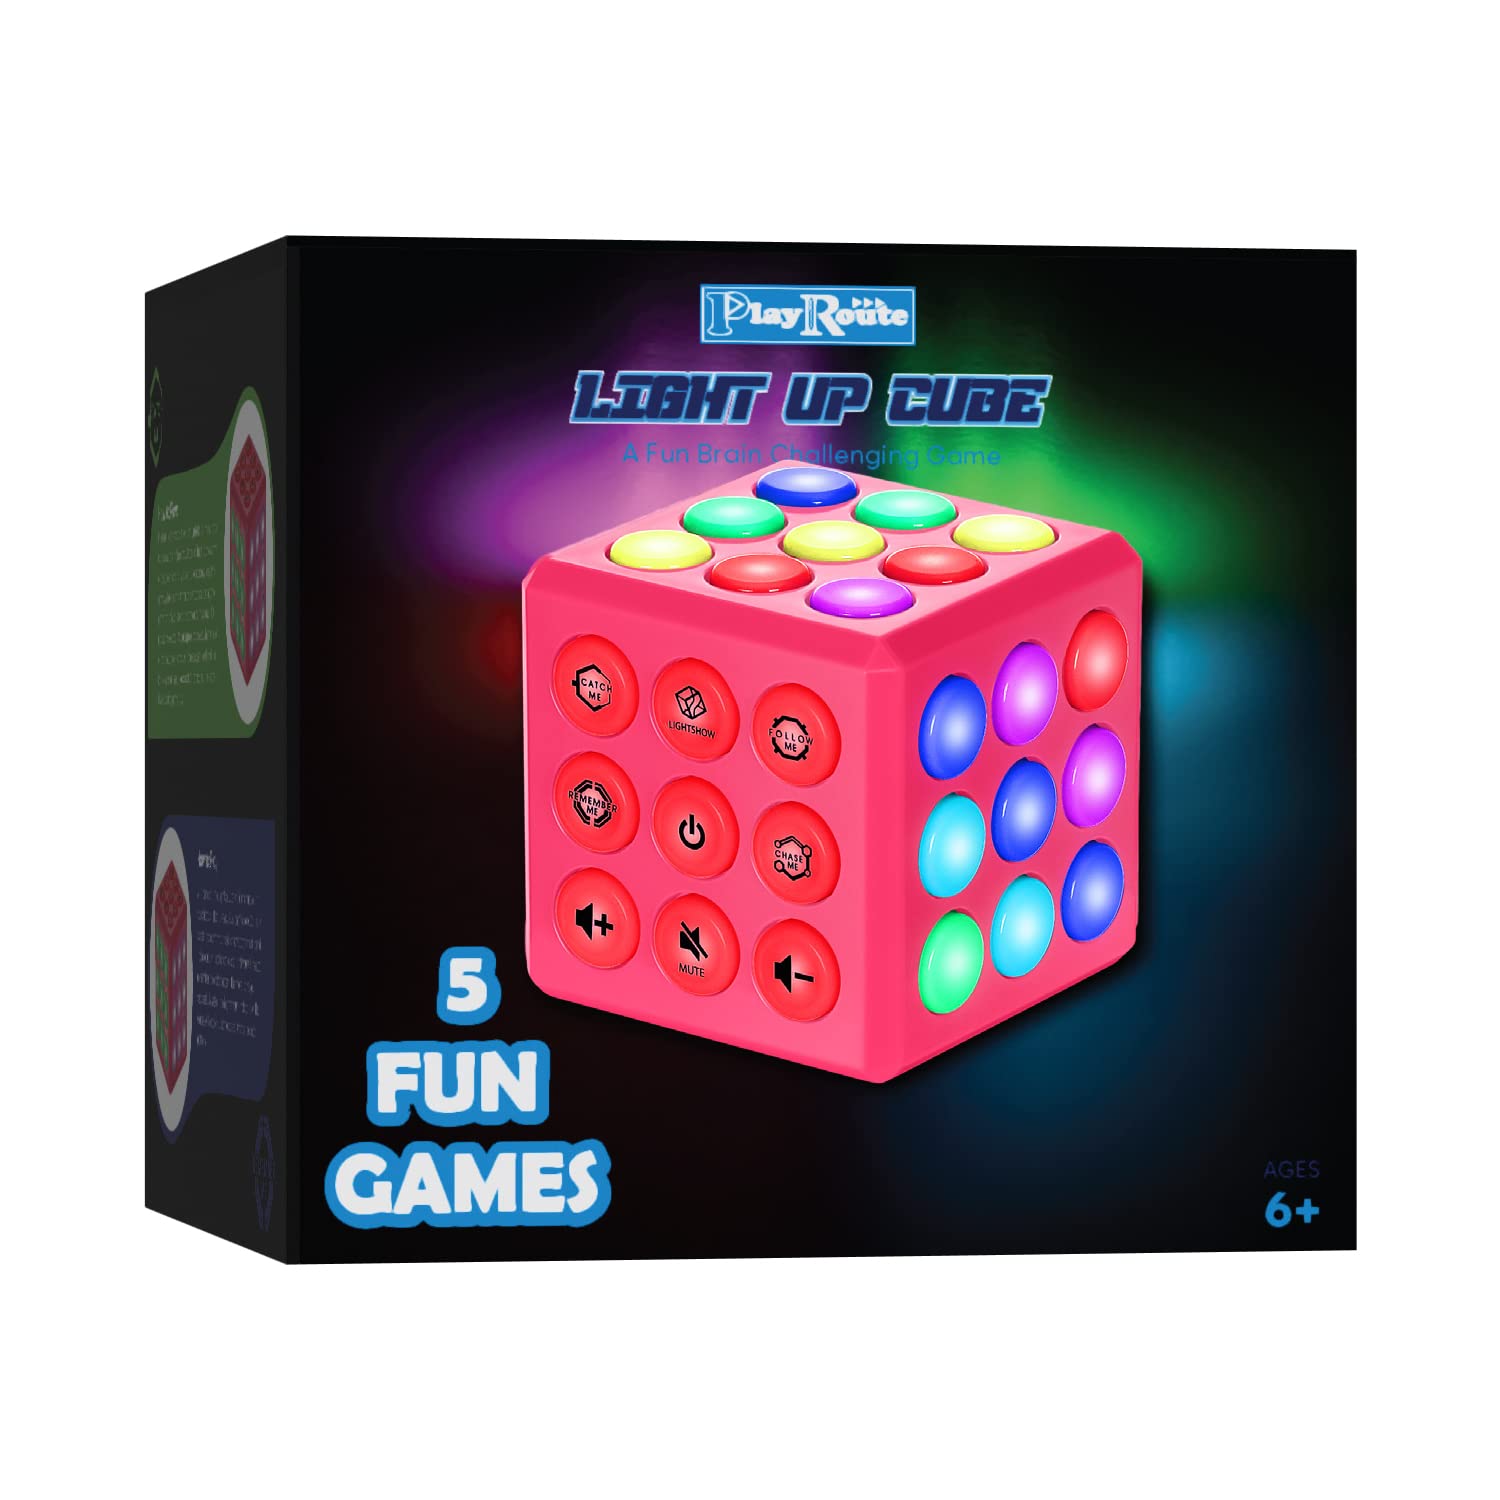 PlayRoute Light Up cube Toy - 5 Electronic Brain & Memory games Toy for girls Ages 6 7 8 9 10-12 Years Old and Up - Holiday or B